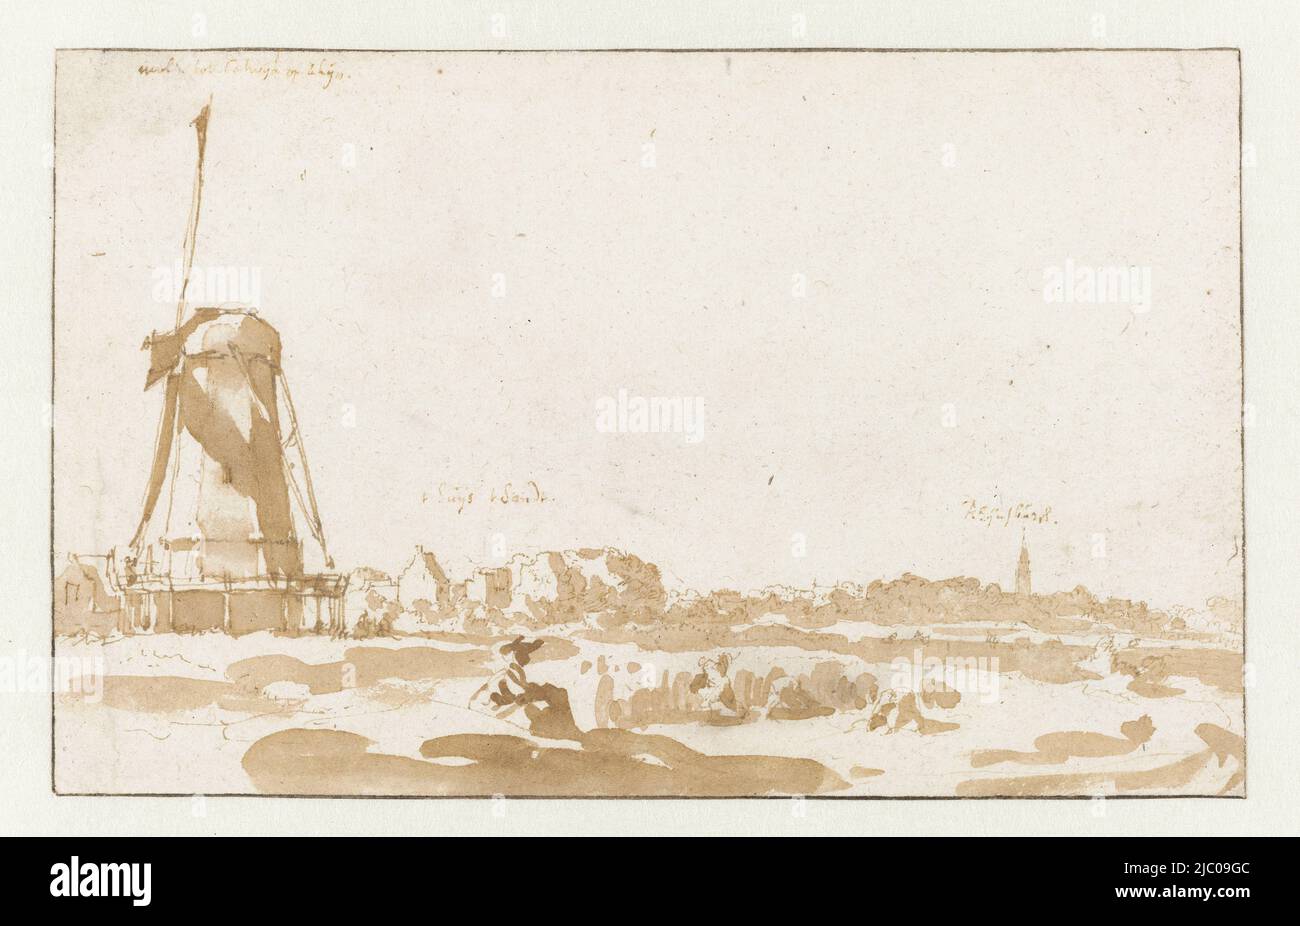 View from the western bank of the Rhine south of Katwijk aan de Rijn of the windmill located there, in the background the sand and the spire of Rijnsburg, View of a windmill from the bank of the Rhine., draughtsman: Jan de Bisschop, 1648 - 1671, paper, pen, brush, h 96 mm × w 153 mm Stock Photo